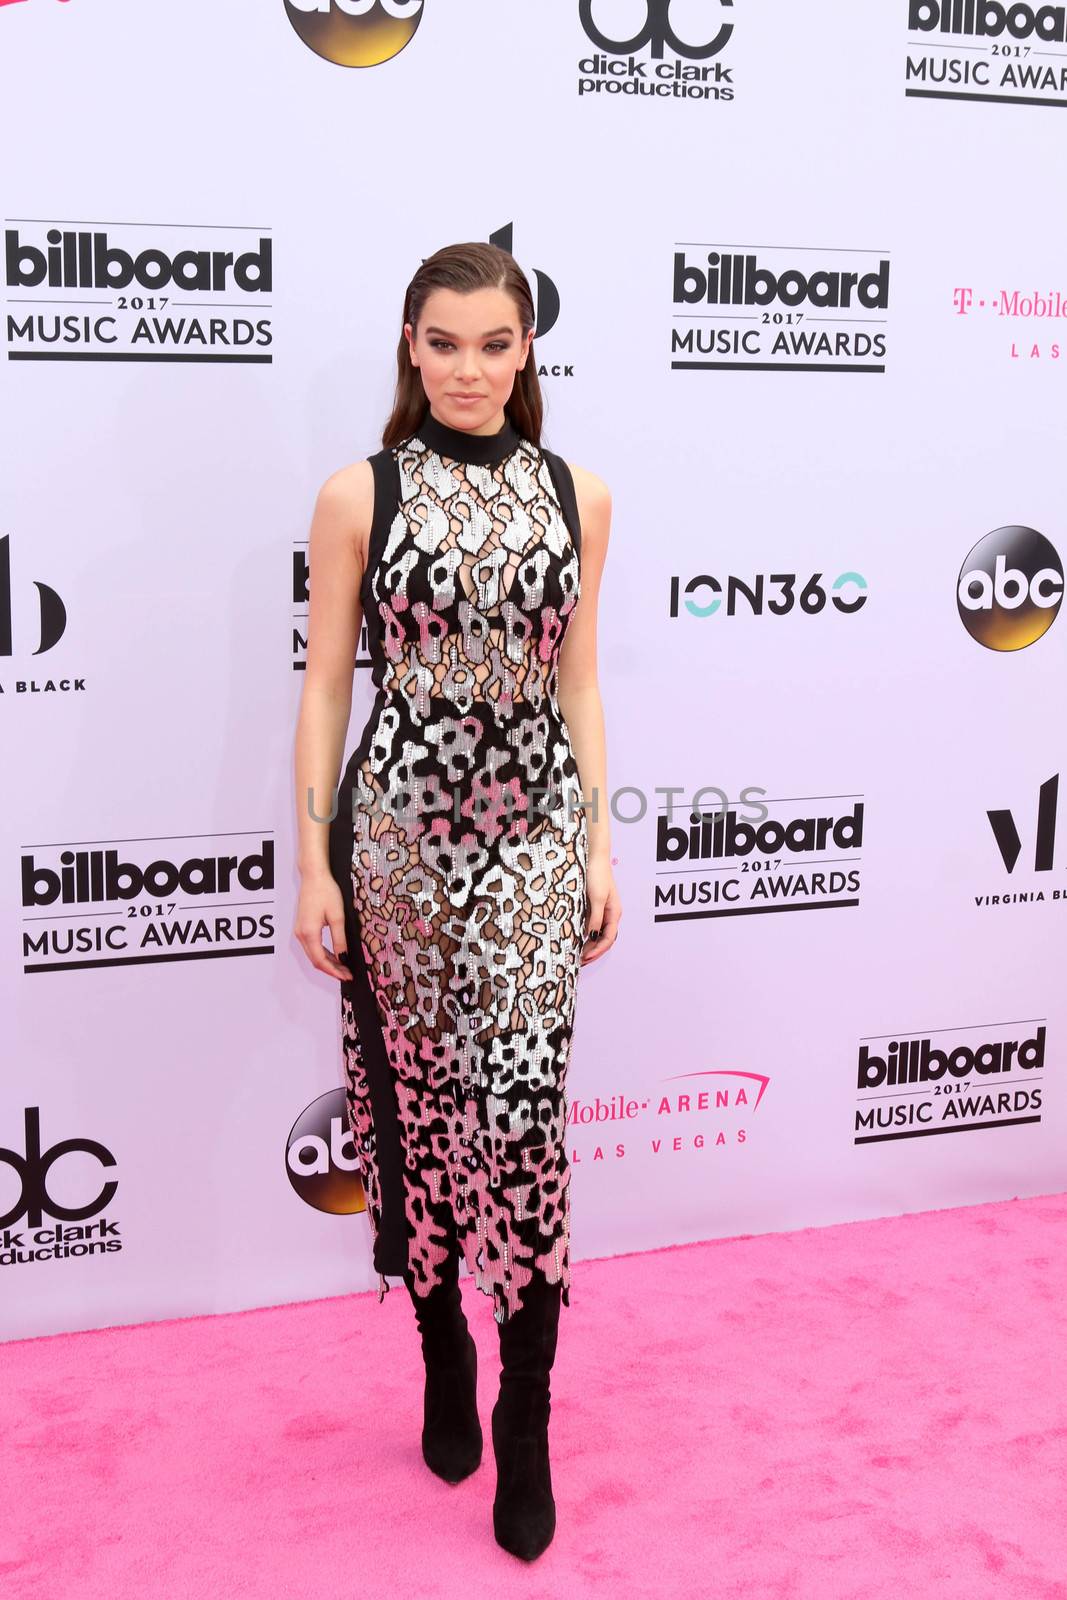 Hailee Steinfeld
at the 2017 Billboard Awards Arrivals, T-Mobile Arena, Las Vegas, NV 05-21-17/ImageCollect by ImageCollect